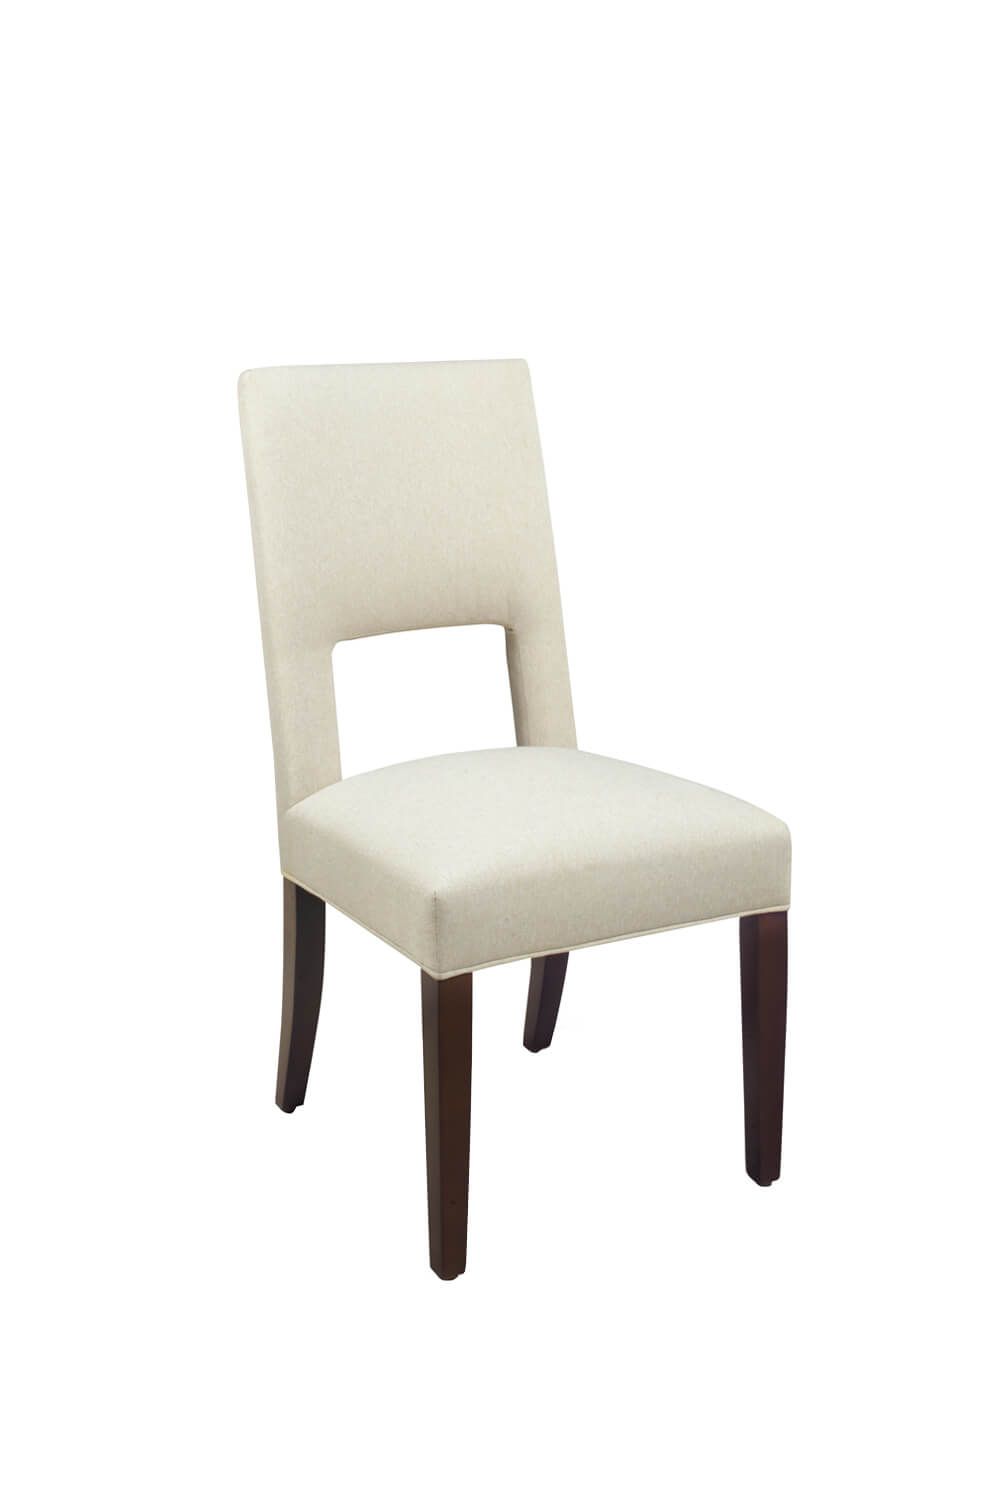 #6655-CH Modern Upholstered Wood Dining Chair